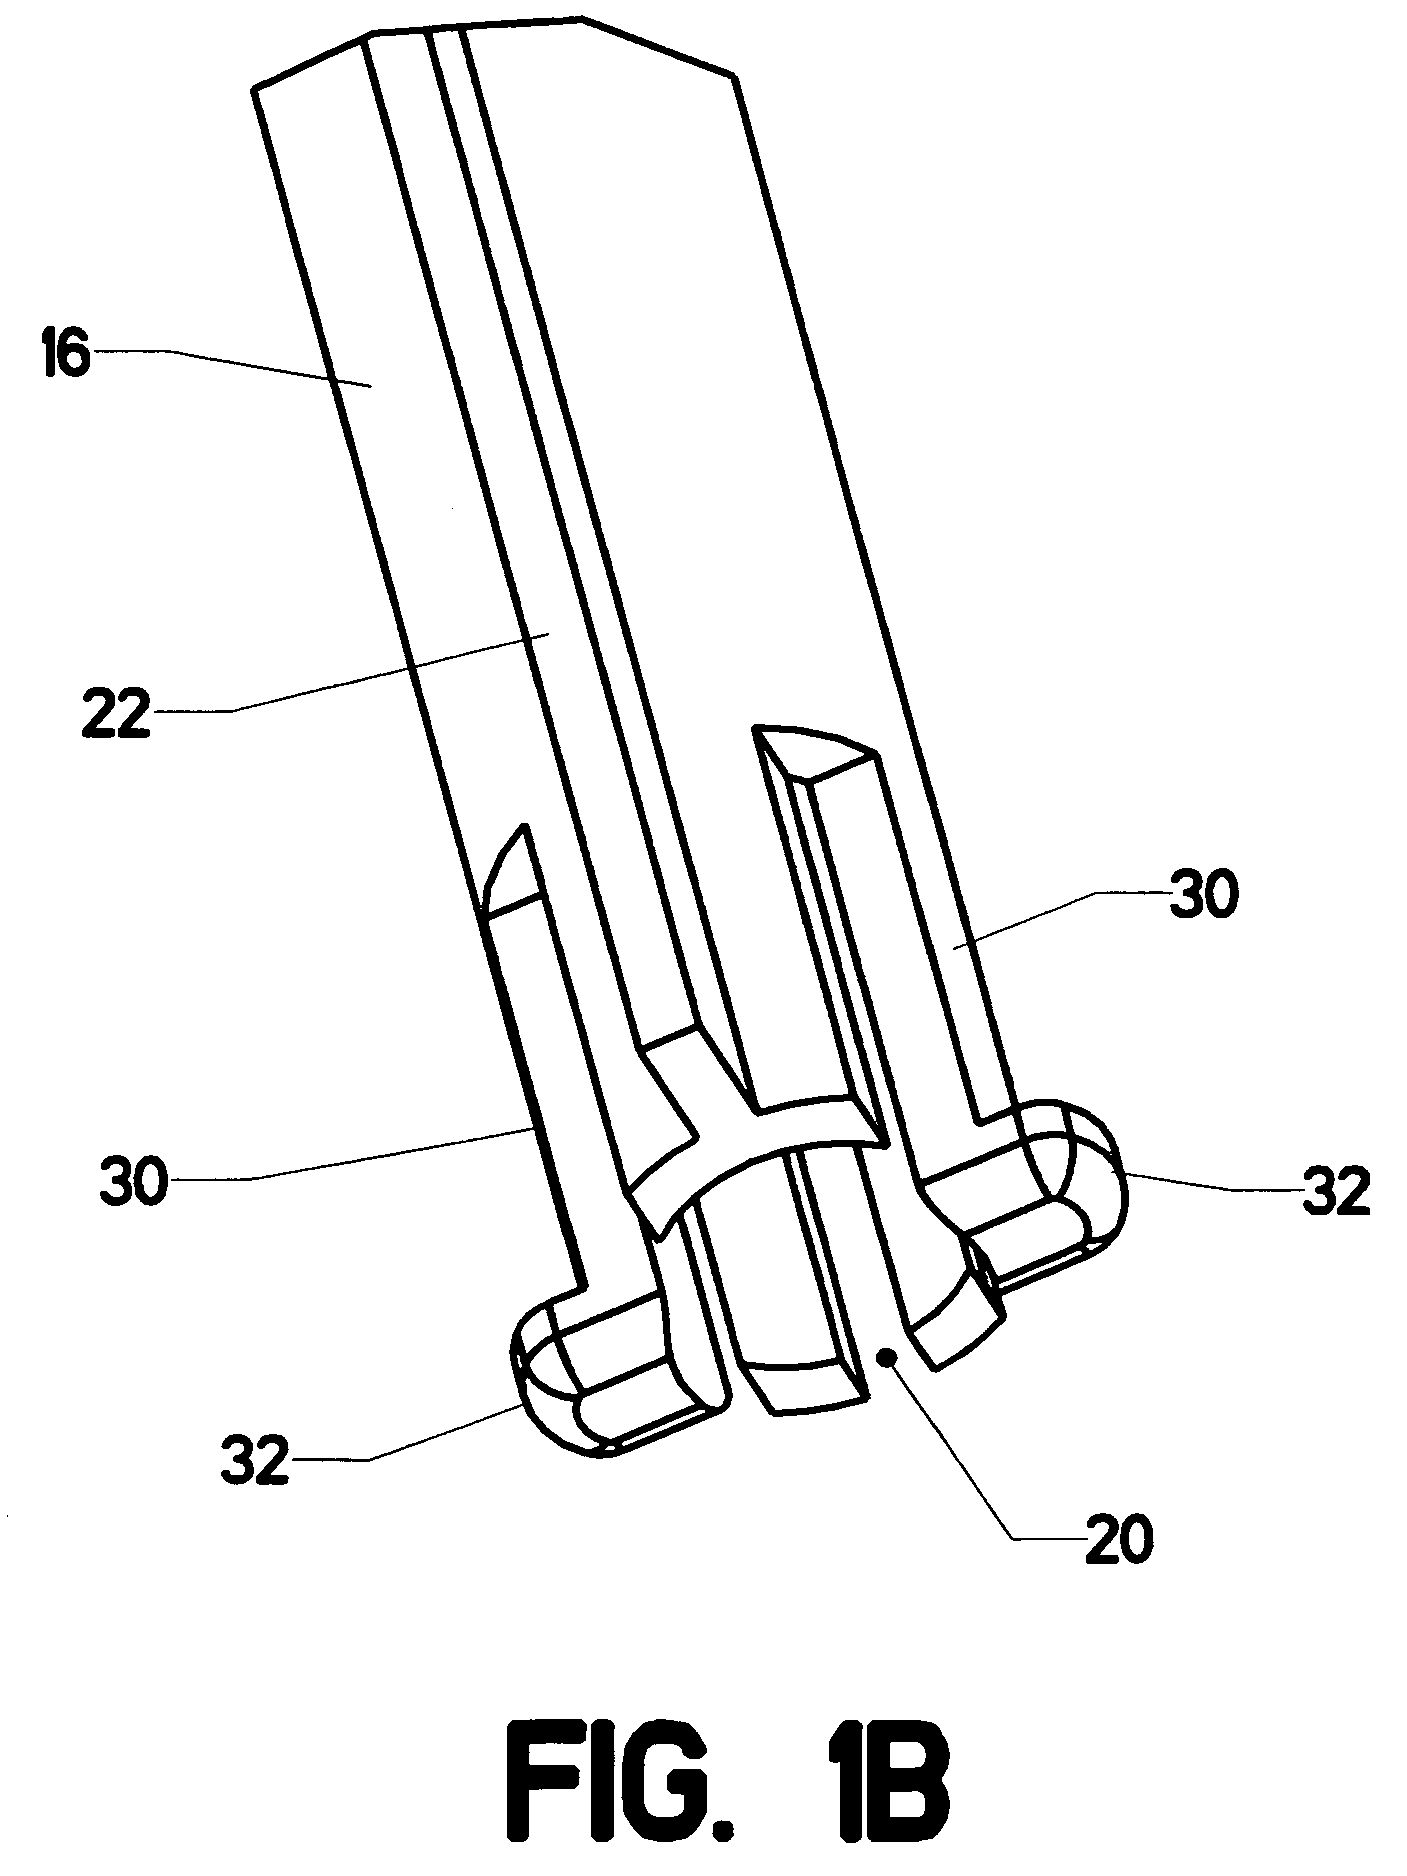 Removable attachment for a line